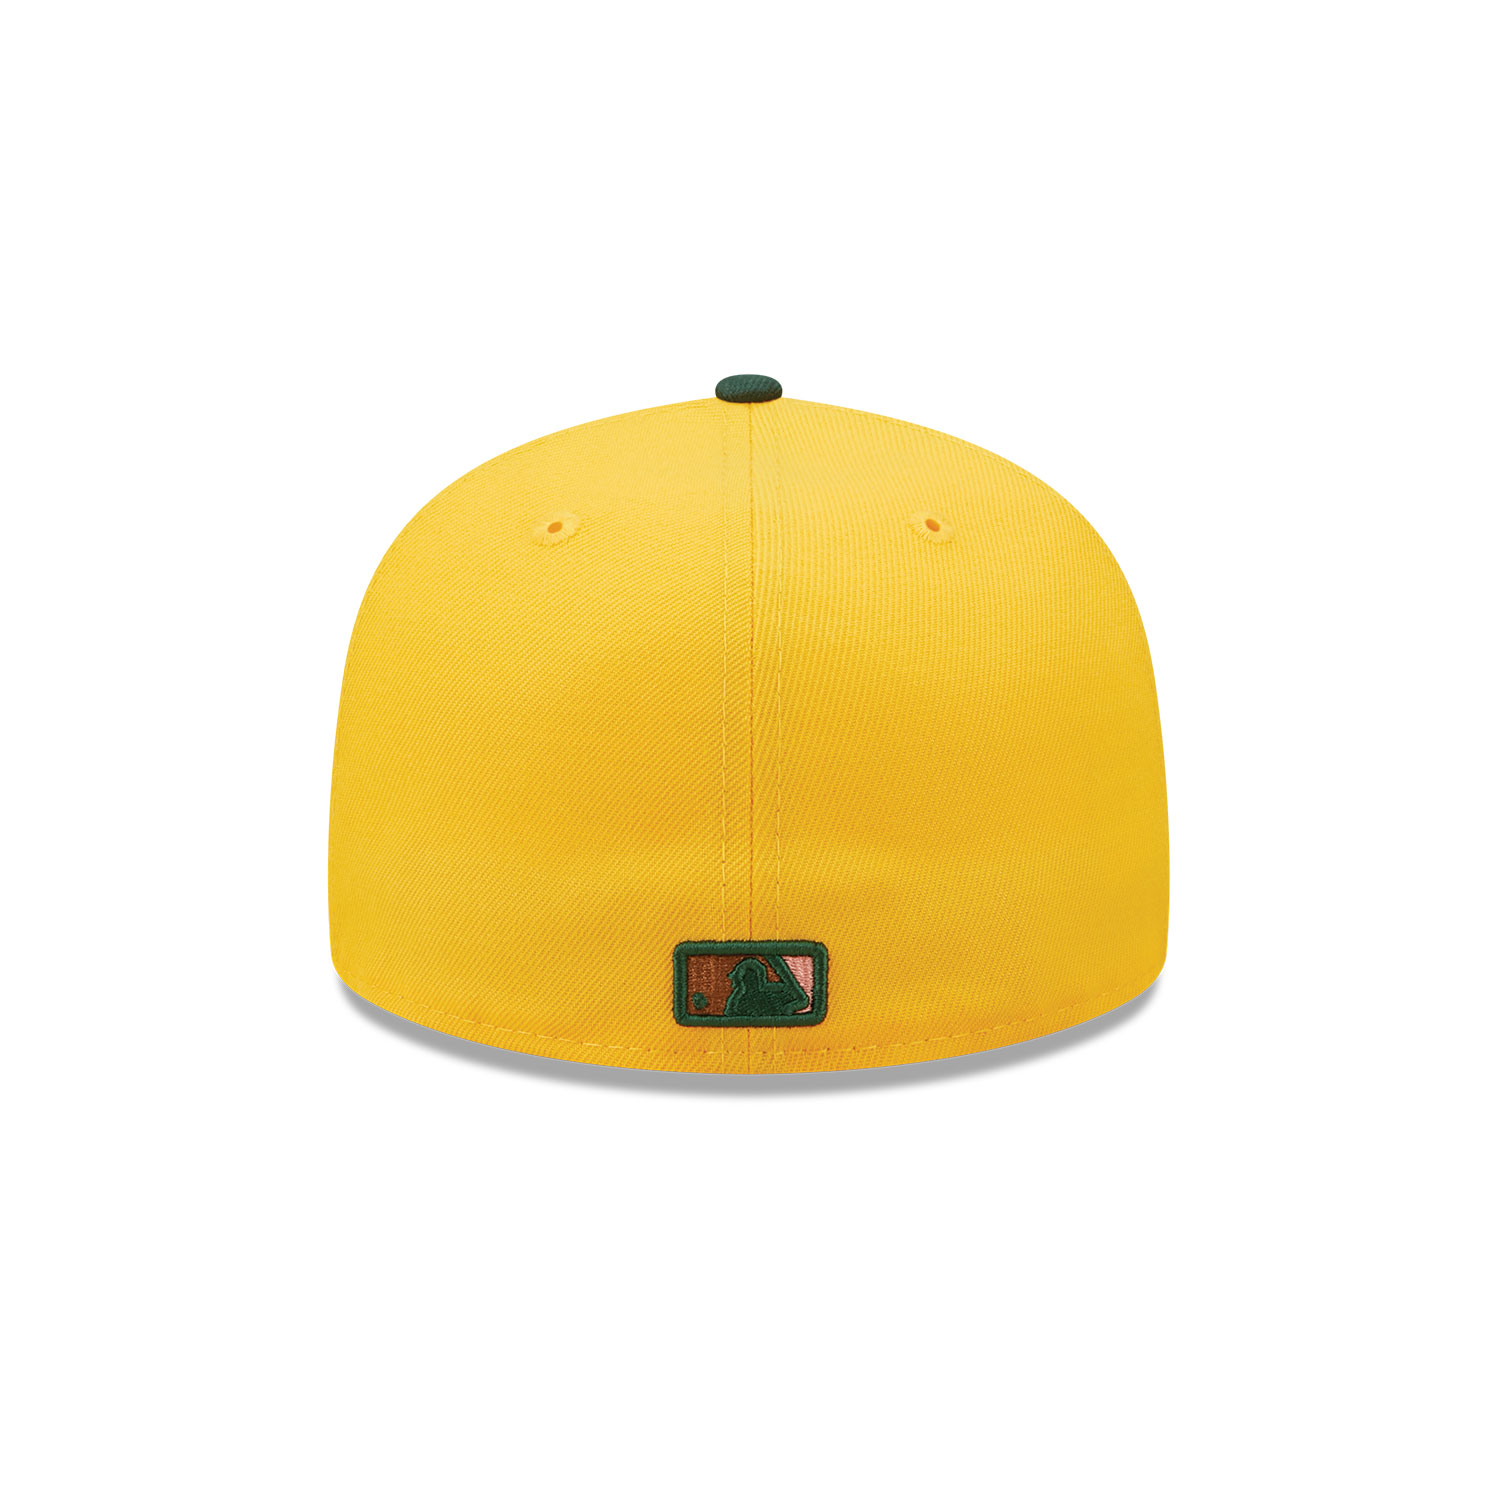 Detroit Tigers Back to School Yellow 59FIFTY Fitted Cap